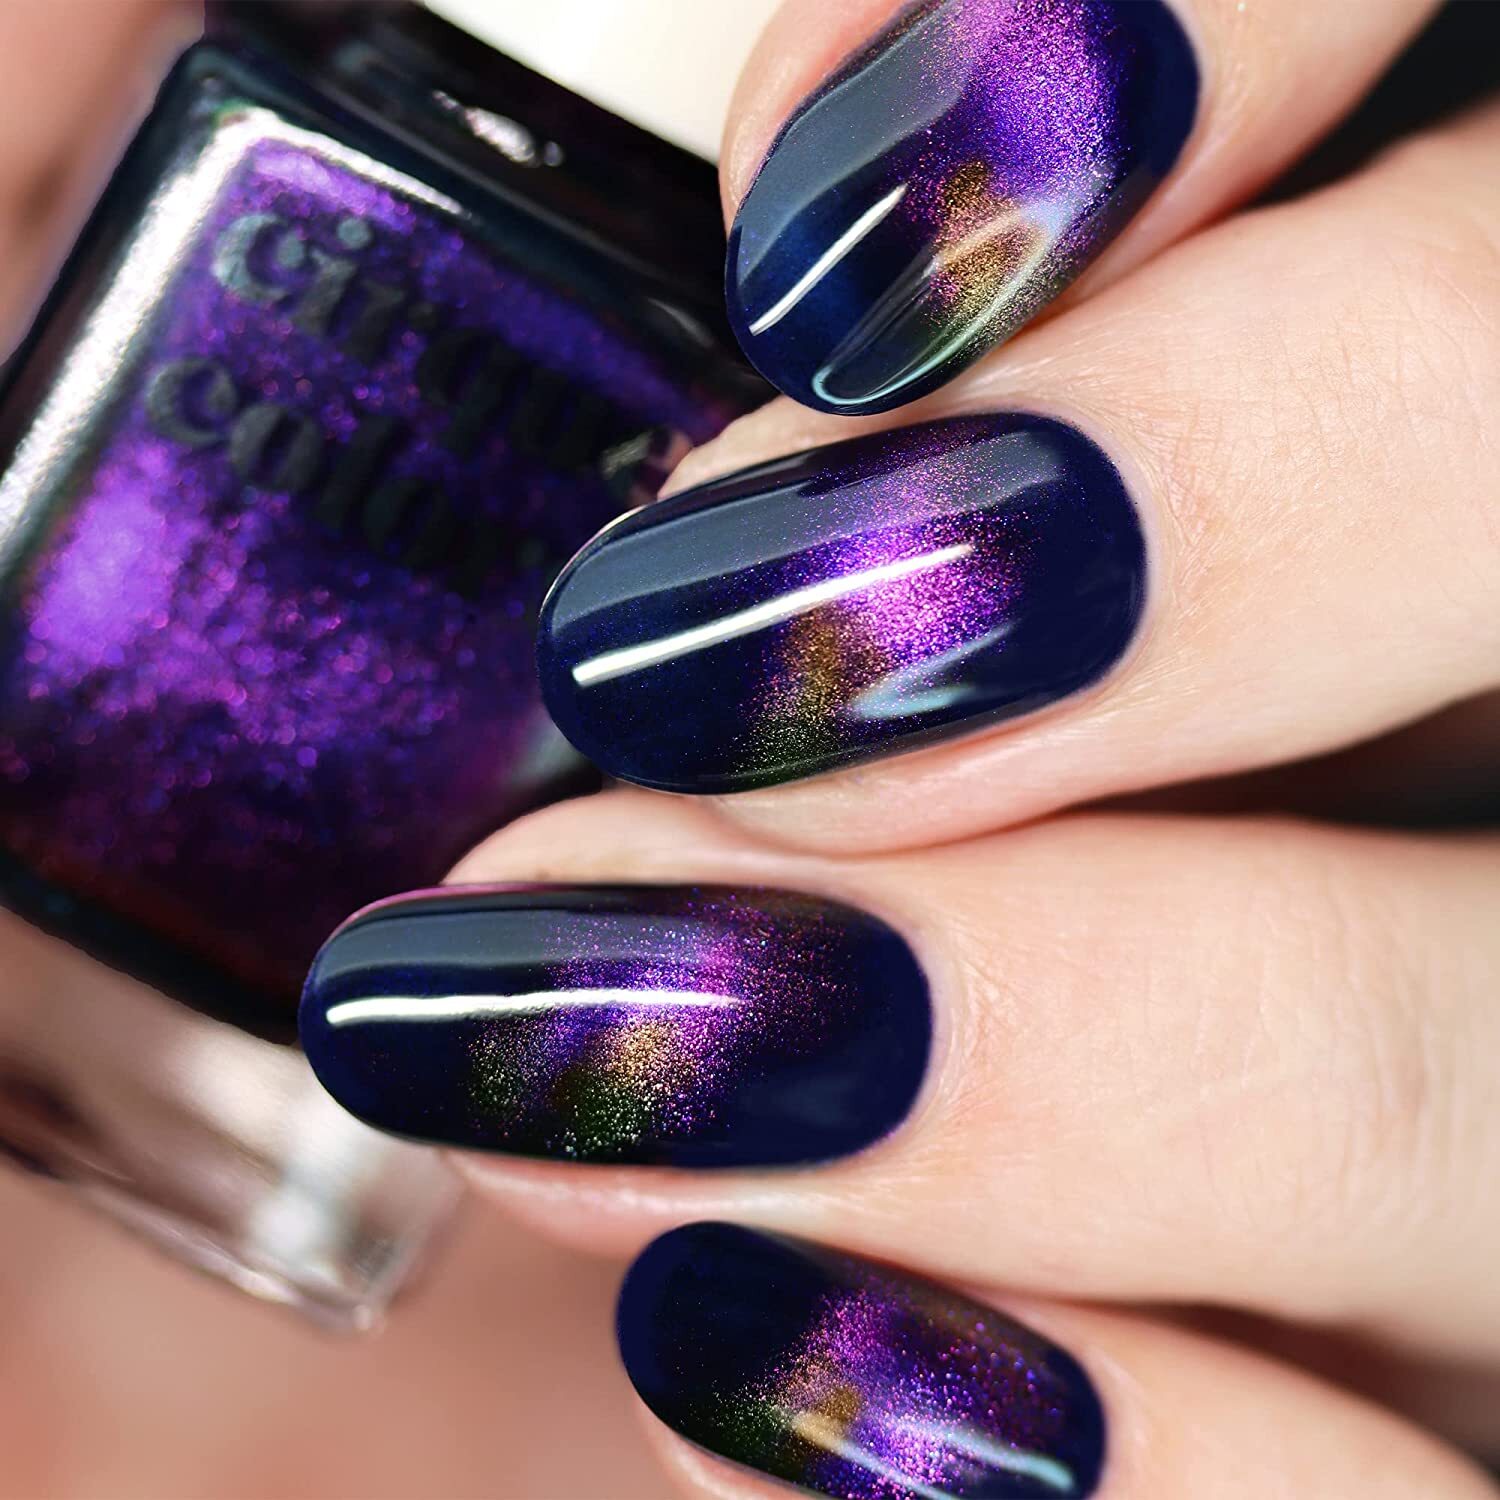 Buy Black Orchid Deep Burgundy / Plum Vampy Holographic Nail Polish Online  in India - Etsy